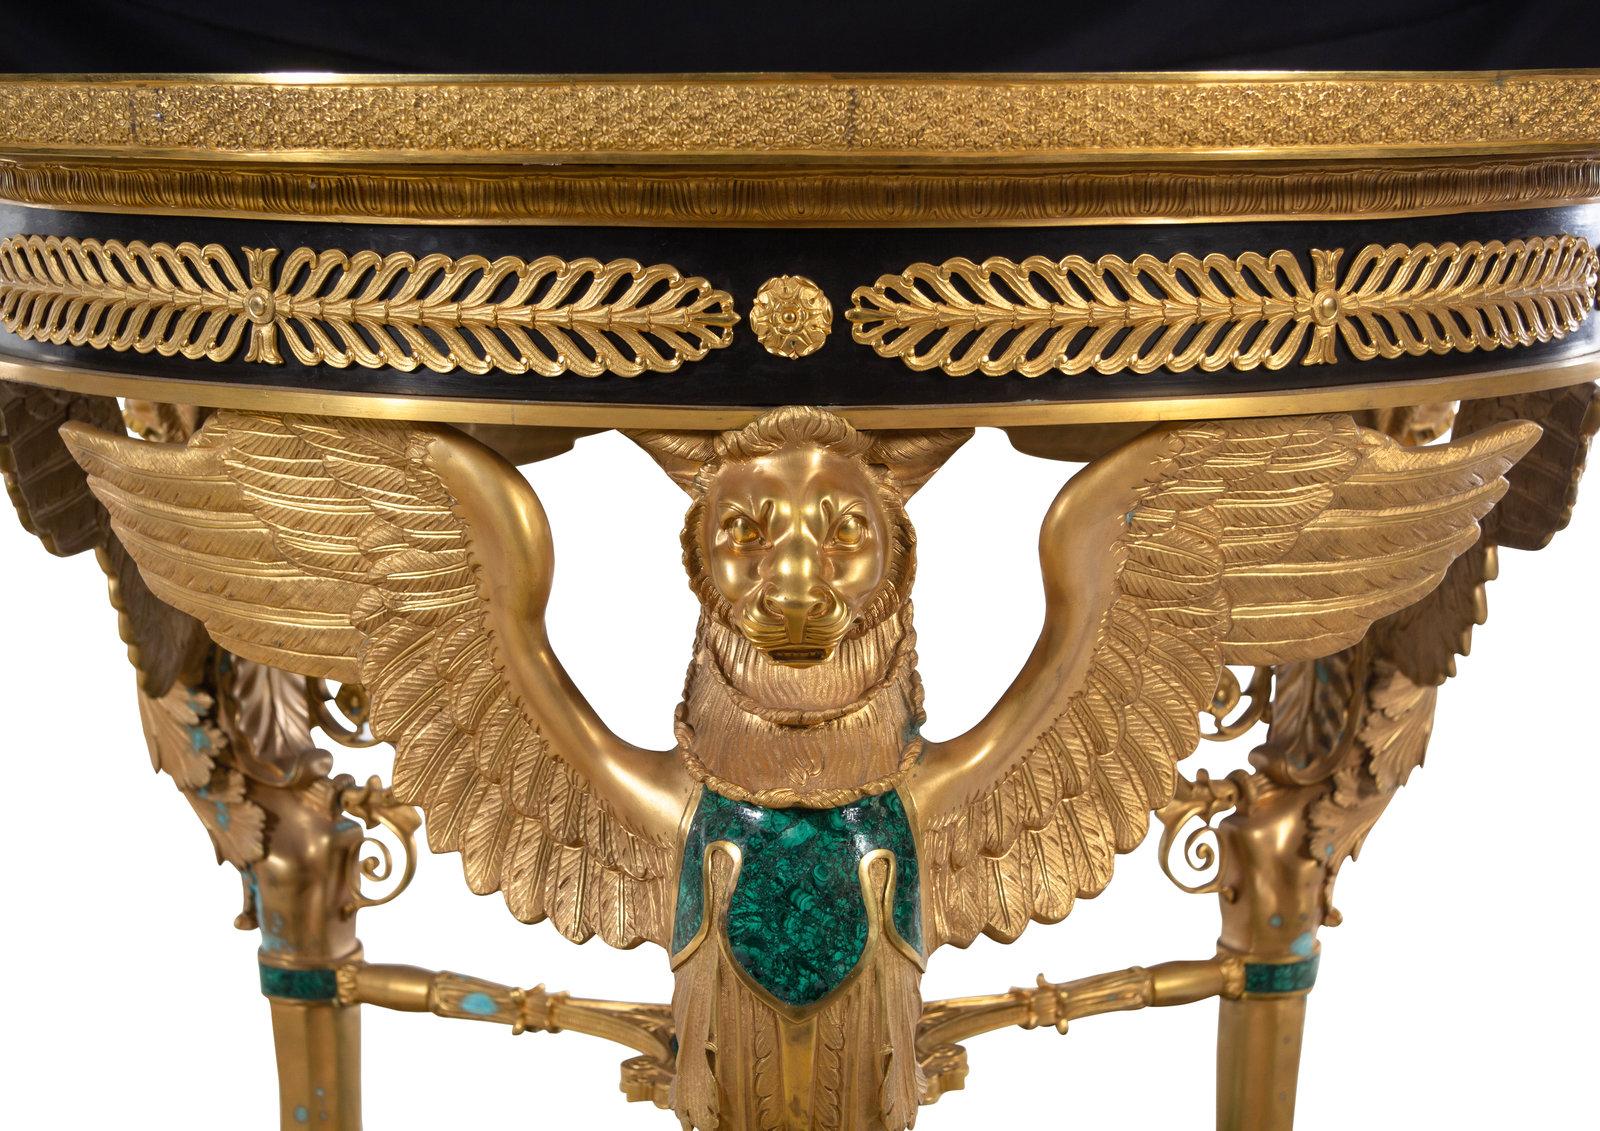 20th Century Large and Impressive Empire Style Ormolu and Malachite Center Table